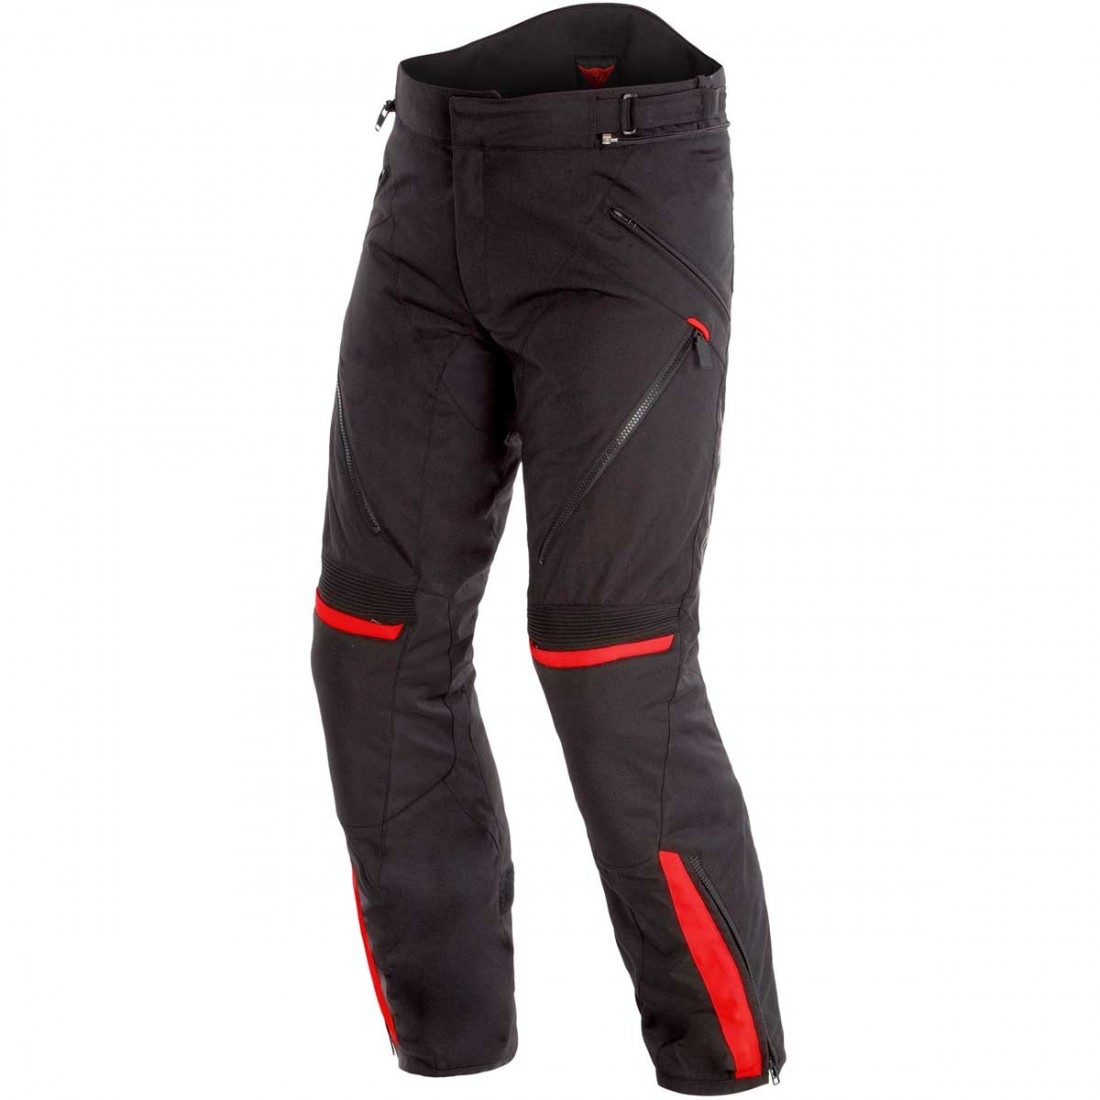 Ropa invierno carretera Dainese-tempest_2_d_dry_black_black_tour_red_00a-0-M-08822521-xlarge